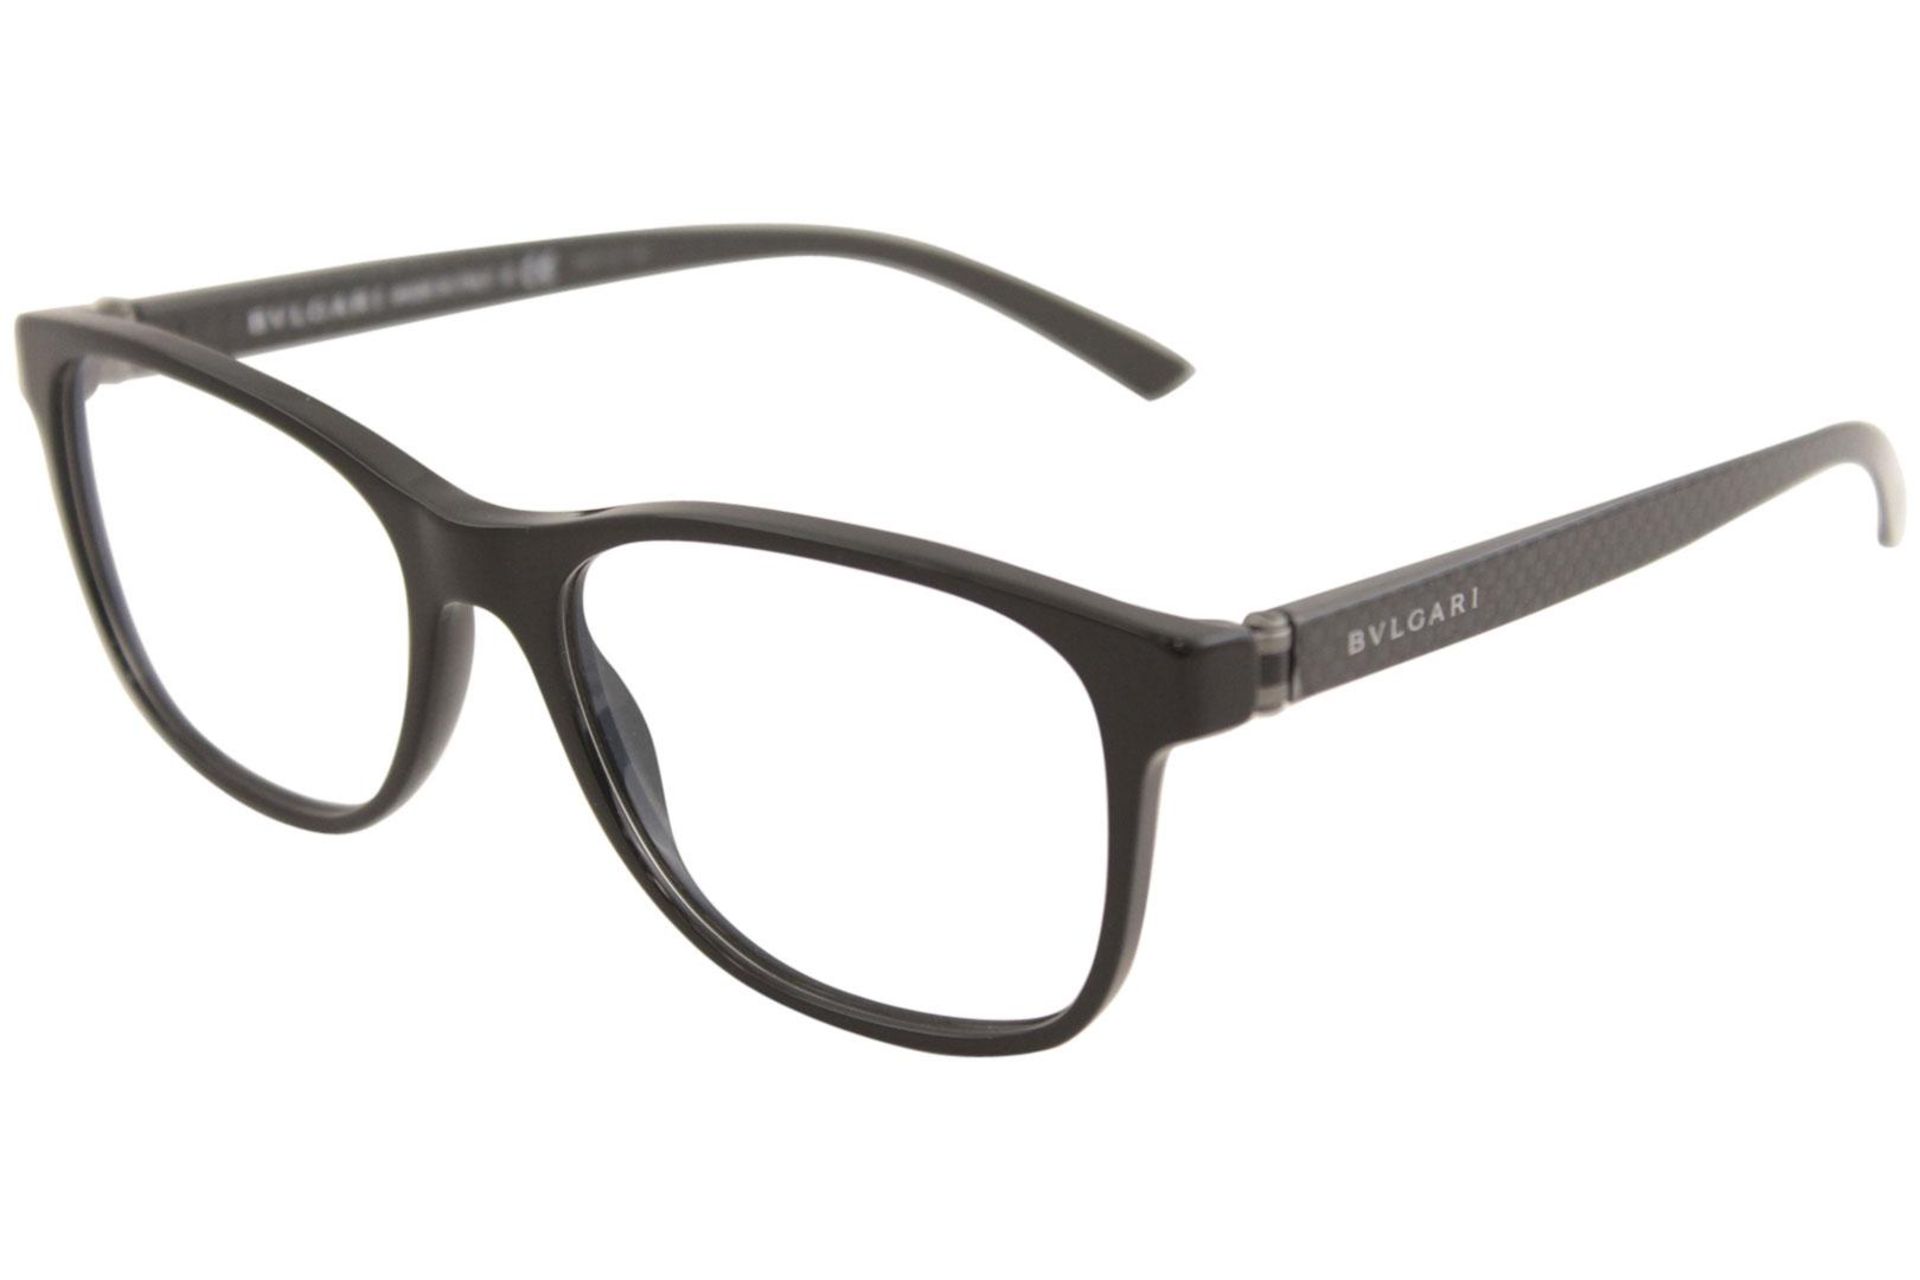 Bvlgari Gents Spectacle Frames with Original Case Surplus Stock or Ex Demo - Image 3 of 7